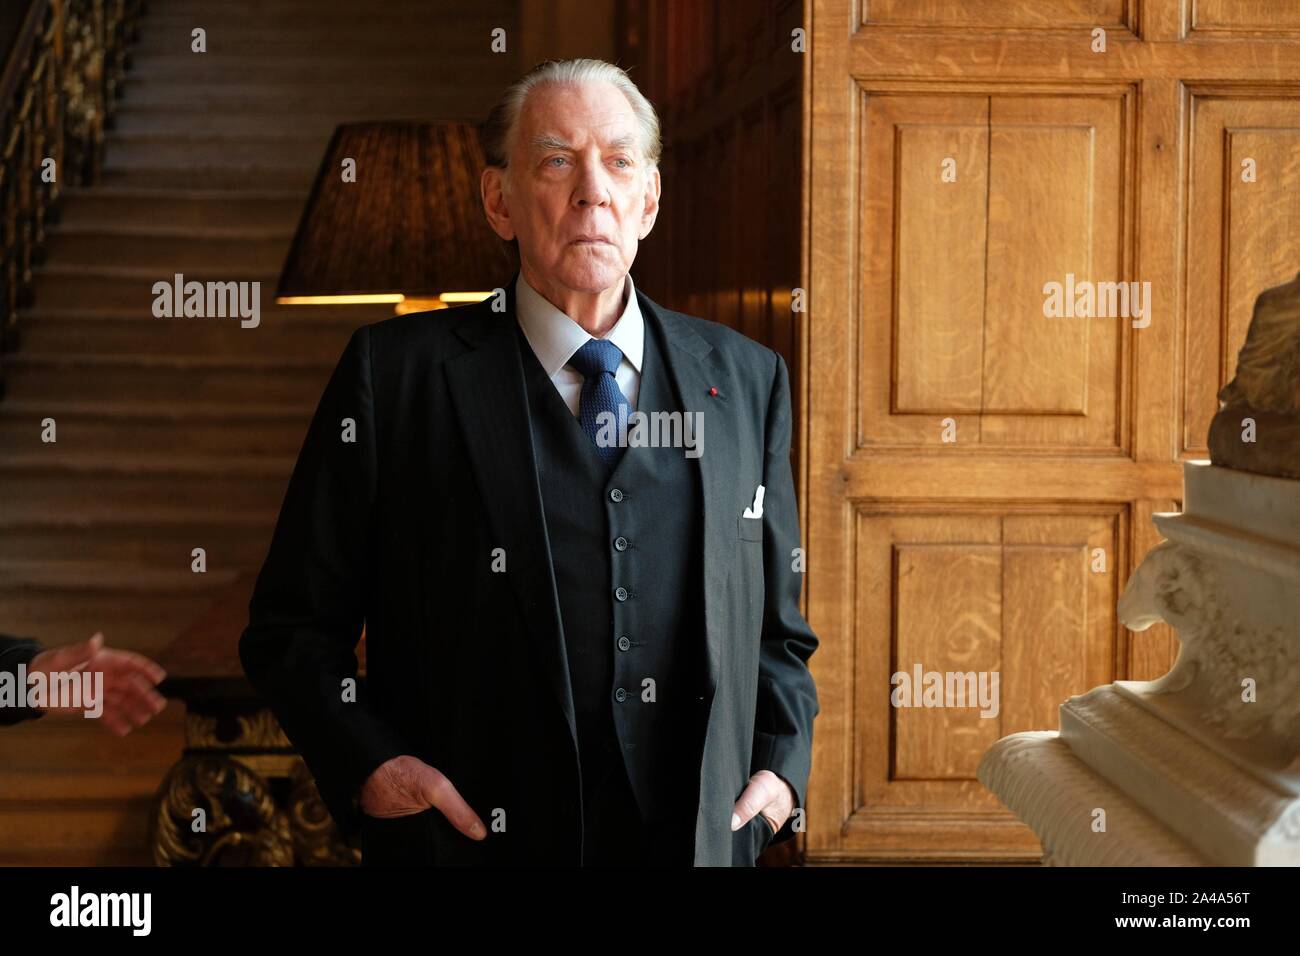 DONALD SUTHERLAND in TRUST (2018), directed by DANNY BOYLE , EMANUELE CRIALESE and SUSANNA WHITE. Credit: CLOUD EIGHT FILMS/DECIBEL FILMS/FX PRODUCTIONS / Album Stock Photo